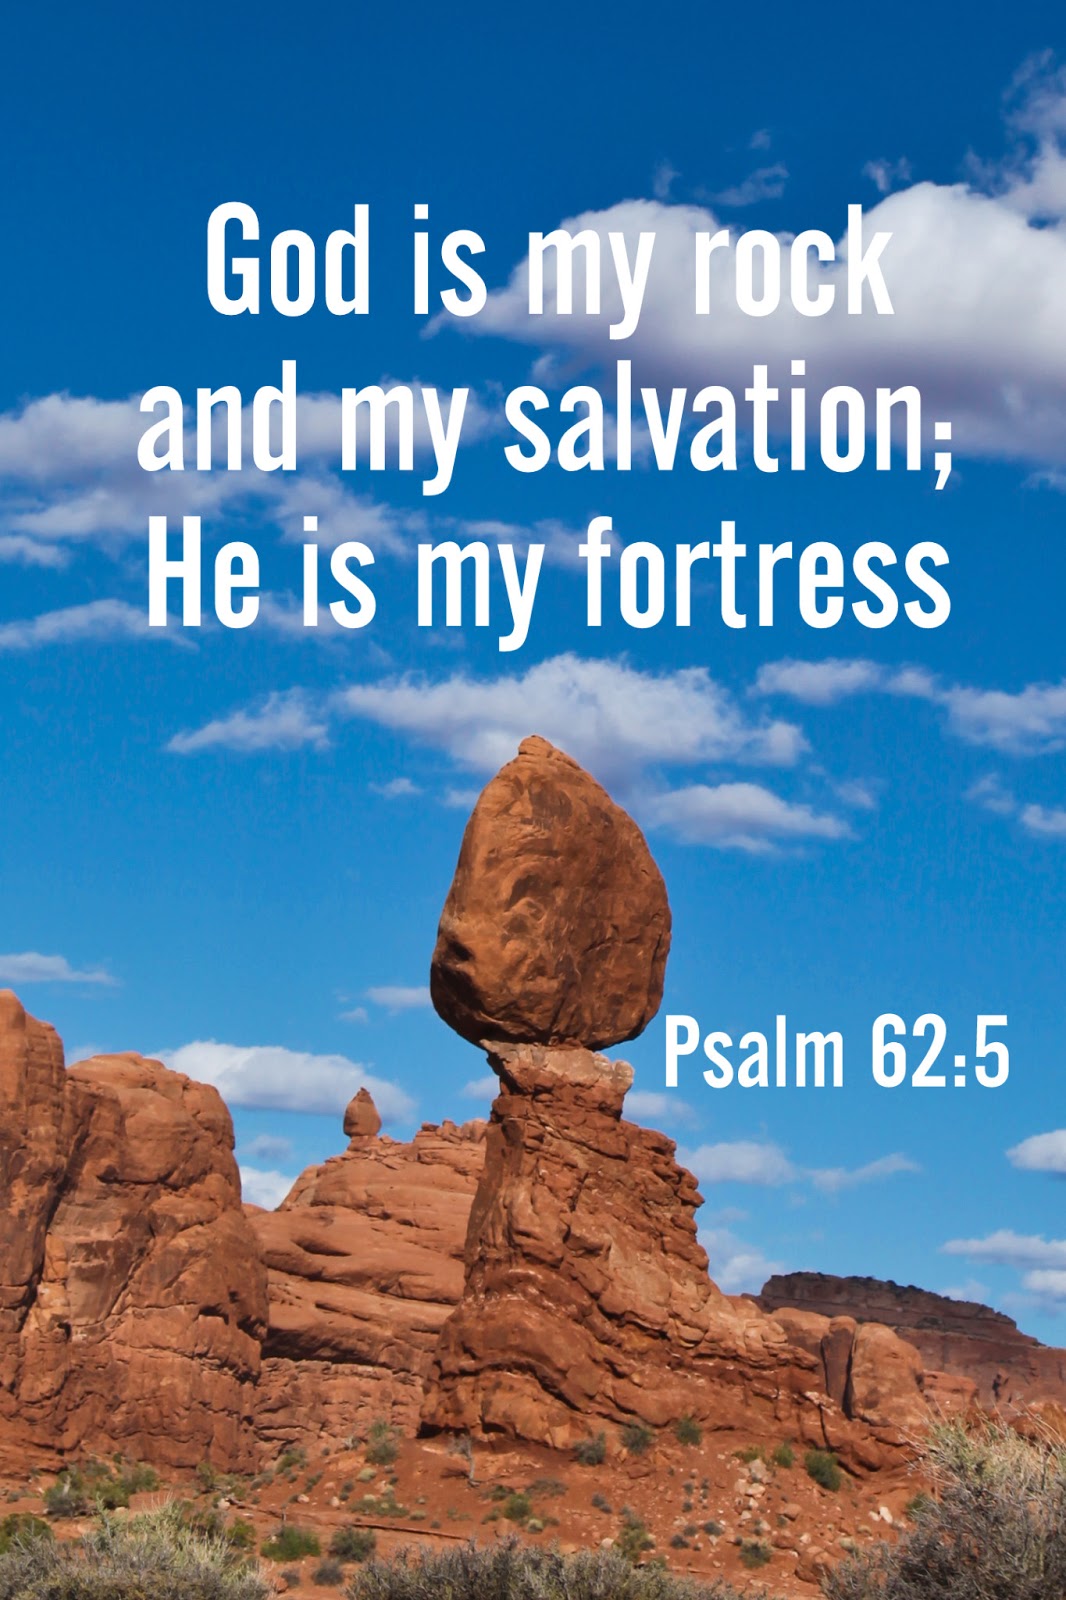 God is my rock and my salvation; he is my fortress